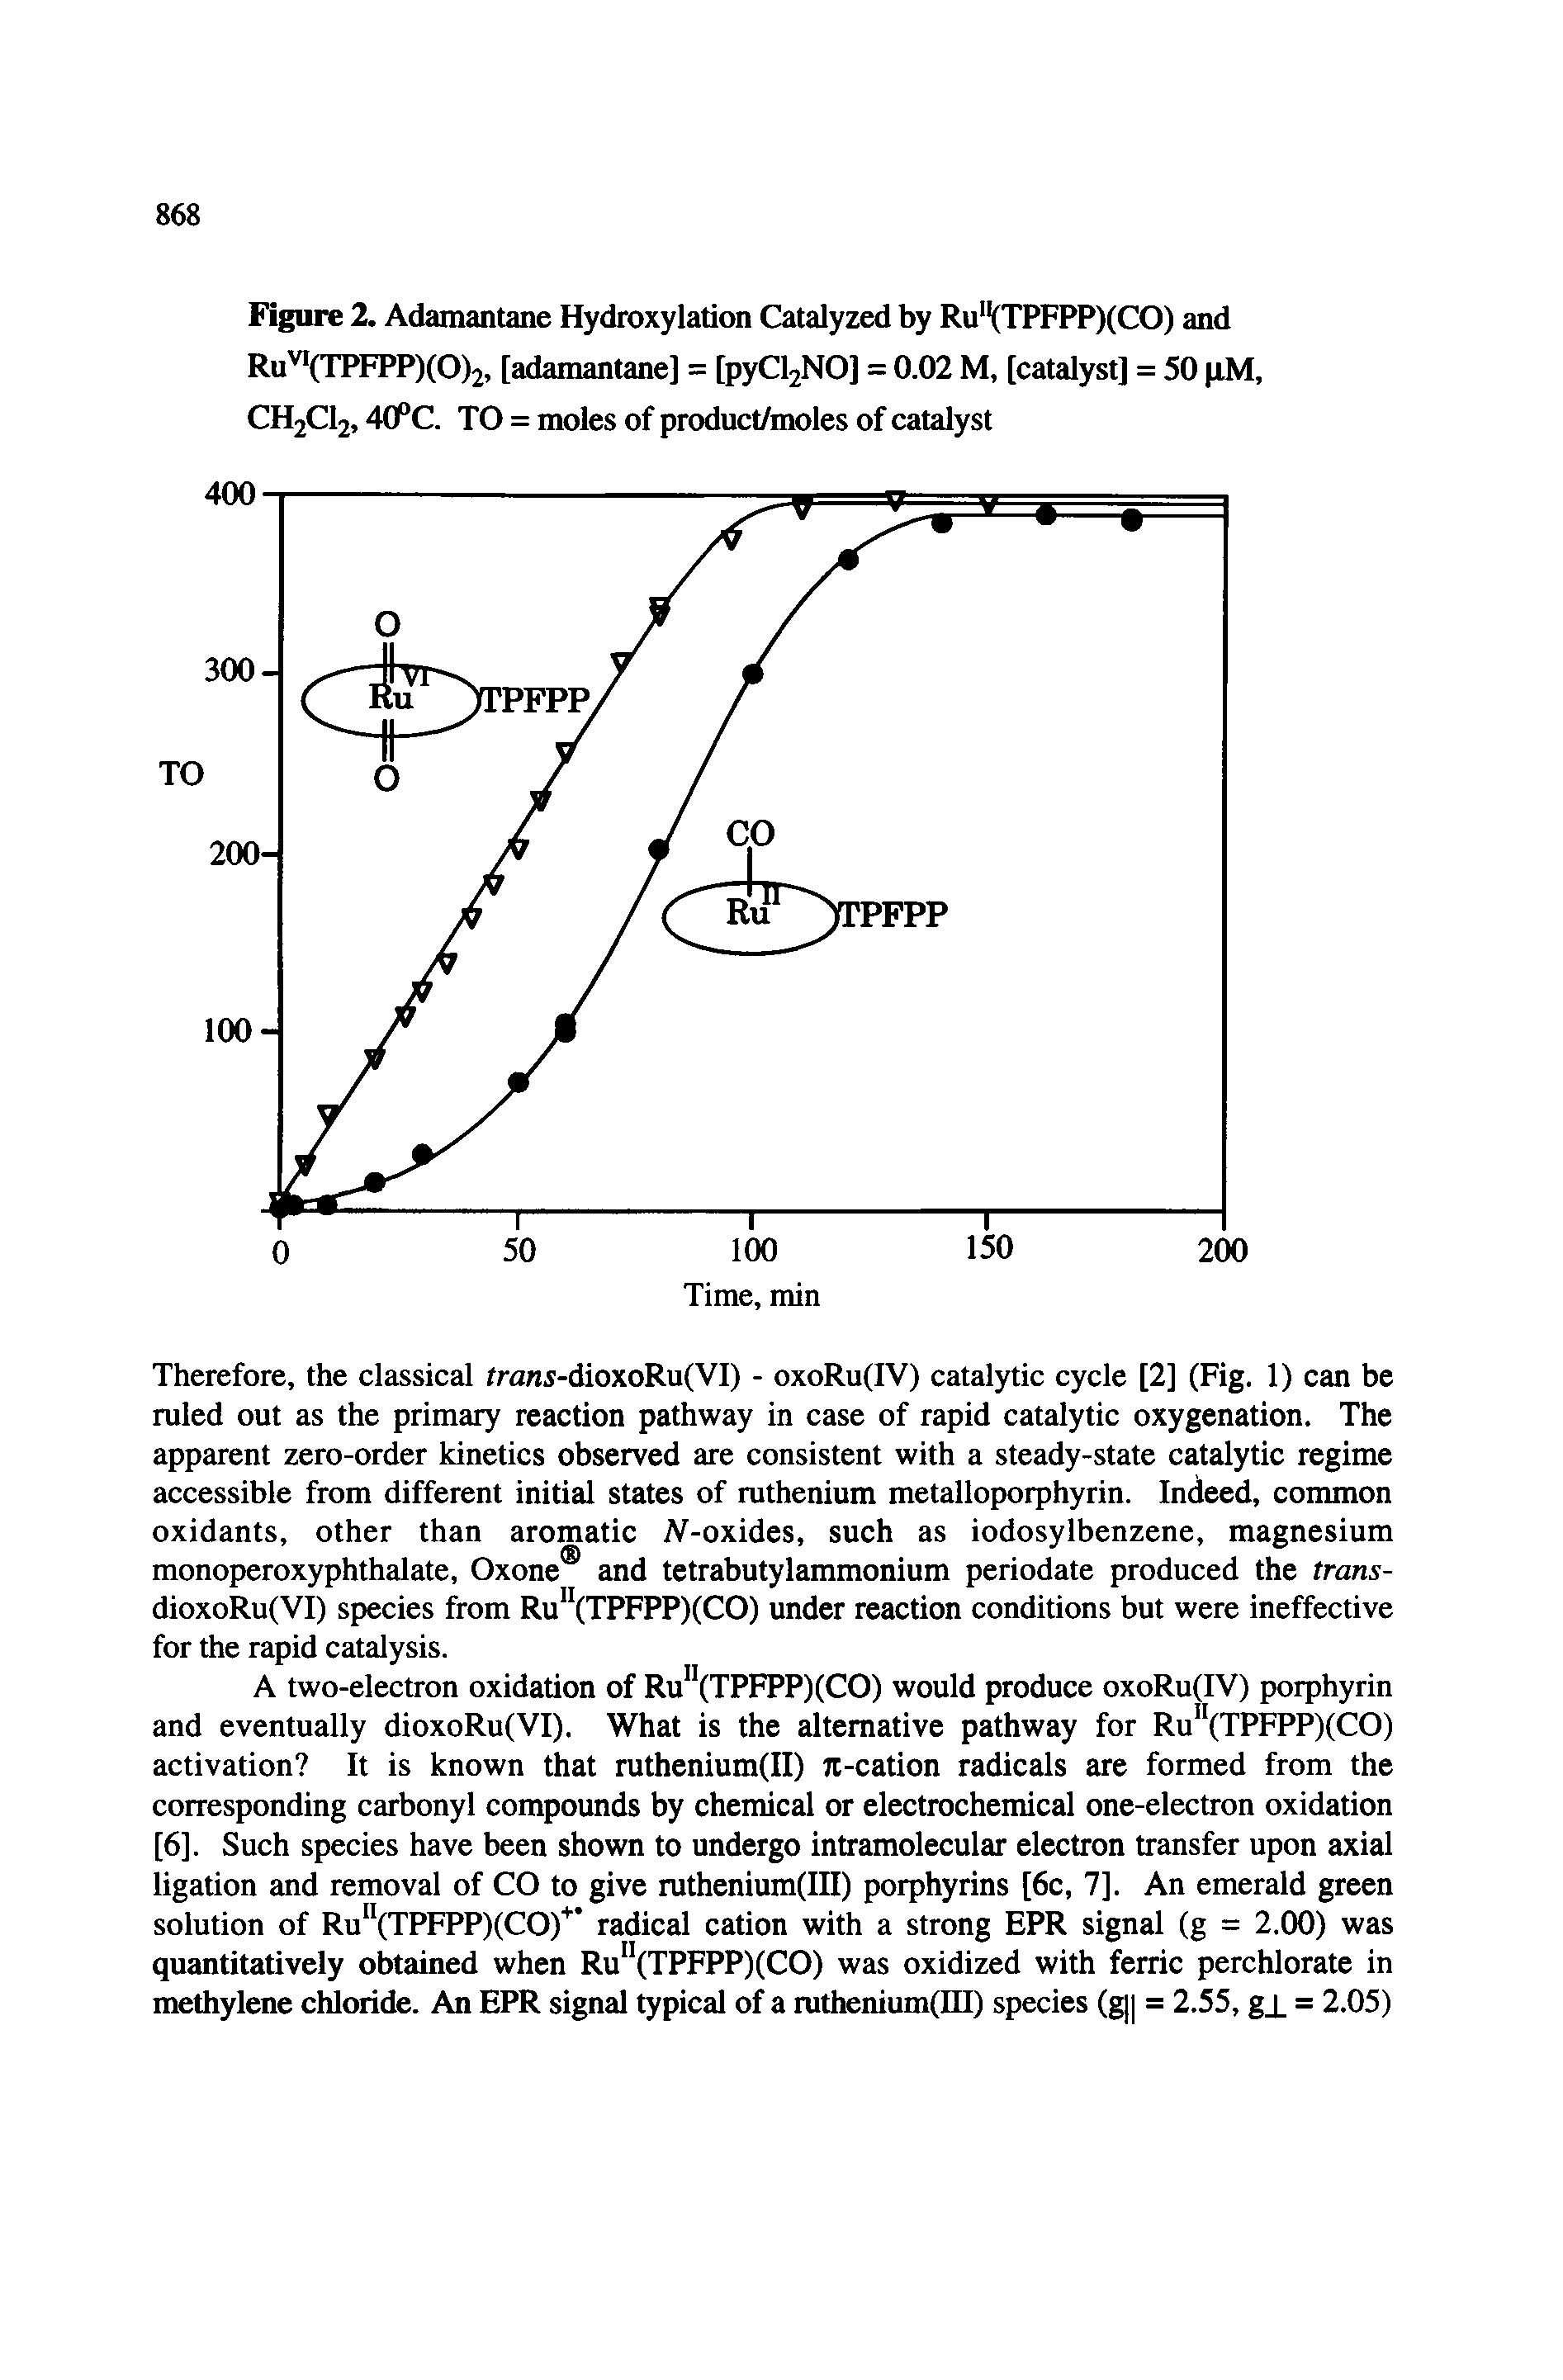 Figure 2. Adamantane Hydroxylation Catalyzed by Ru"(TPFPP)(CO) and Ru (TPFPP)(0)2, [adamantane] = [pyCl2NO] = 0.02 M, [catalyst] = 50 pM, CH2CI2,4(PC. TO = moles of product/moles of catalyst...